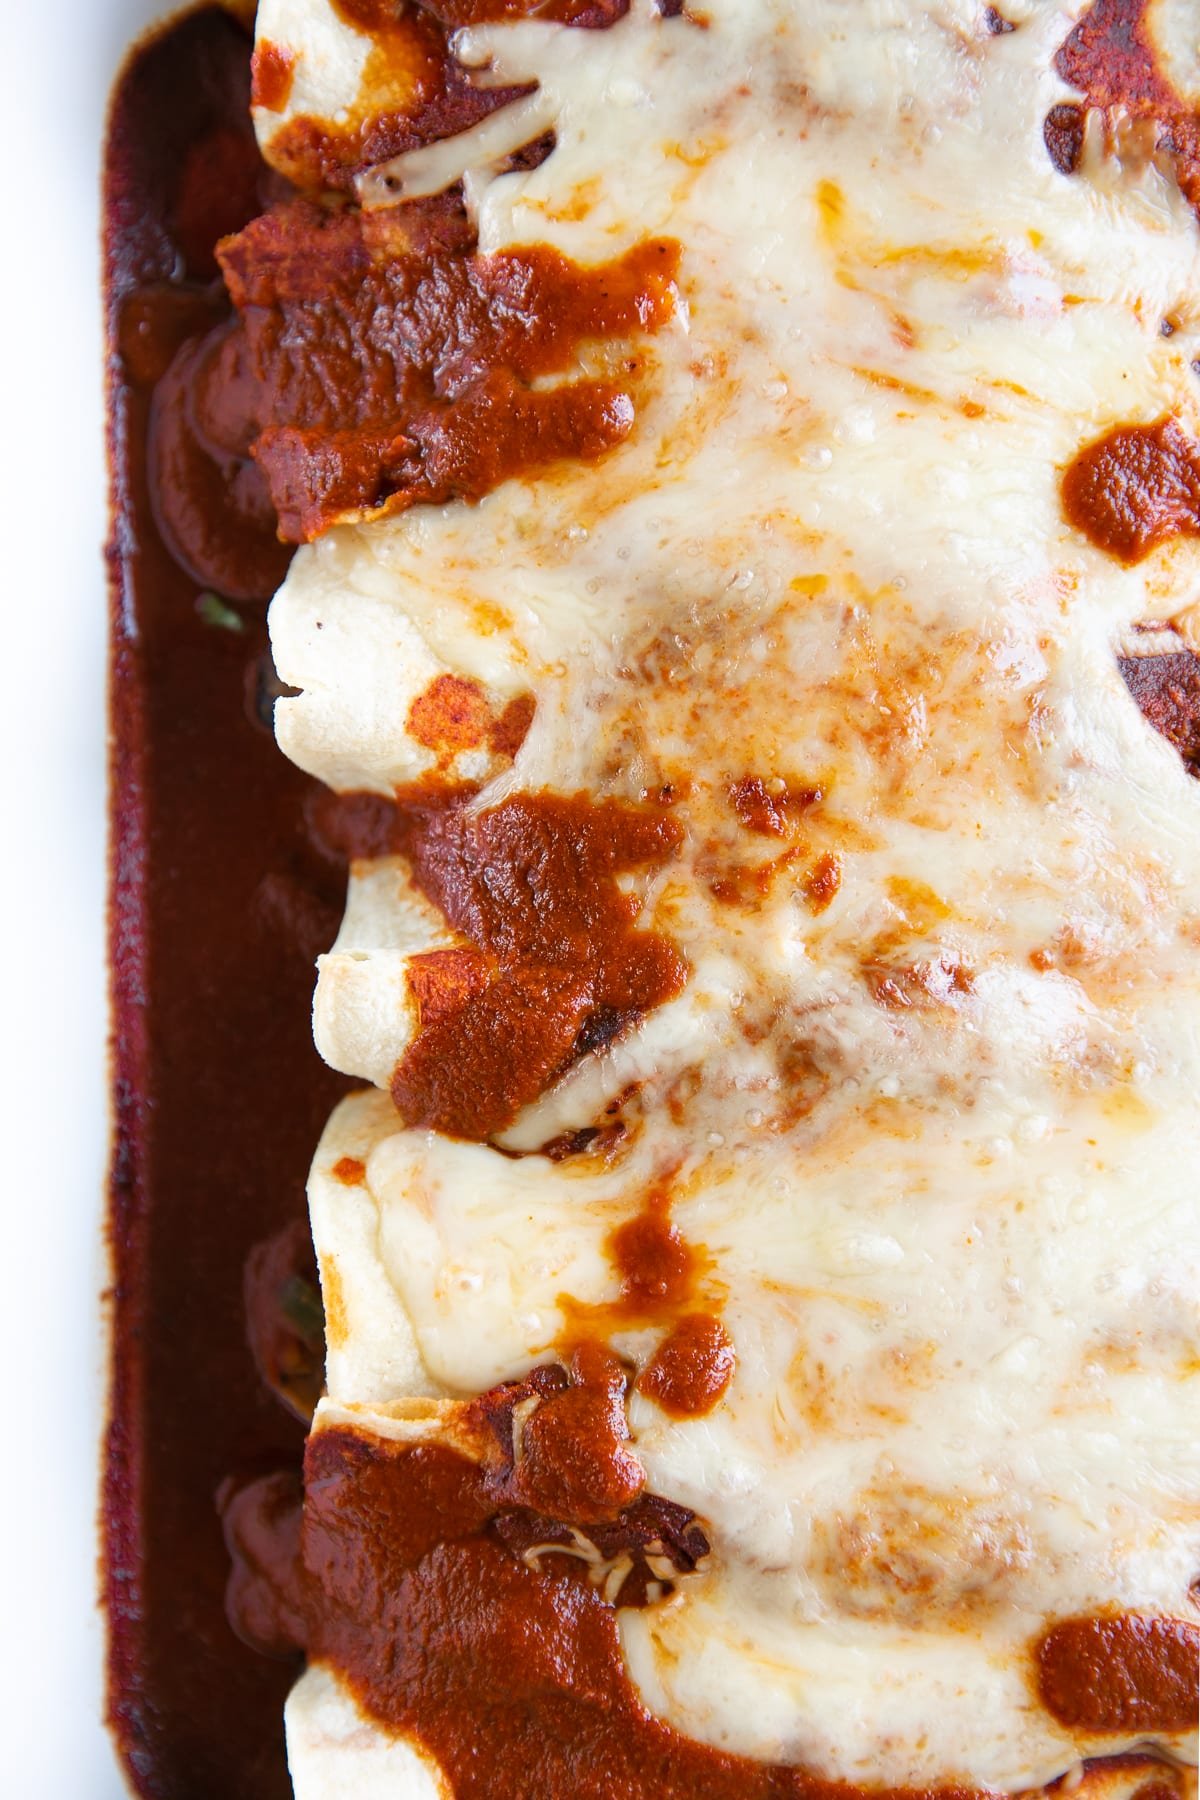 Enchiladas filled with mixed veggies, rolled in corn tortillas, topped with cheese and baked.